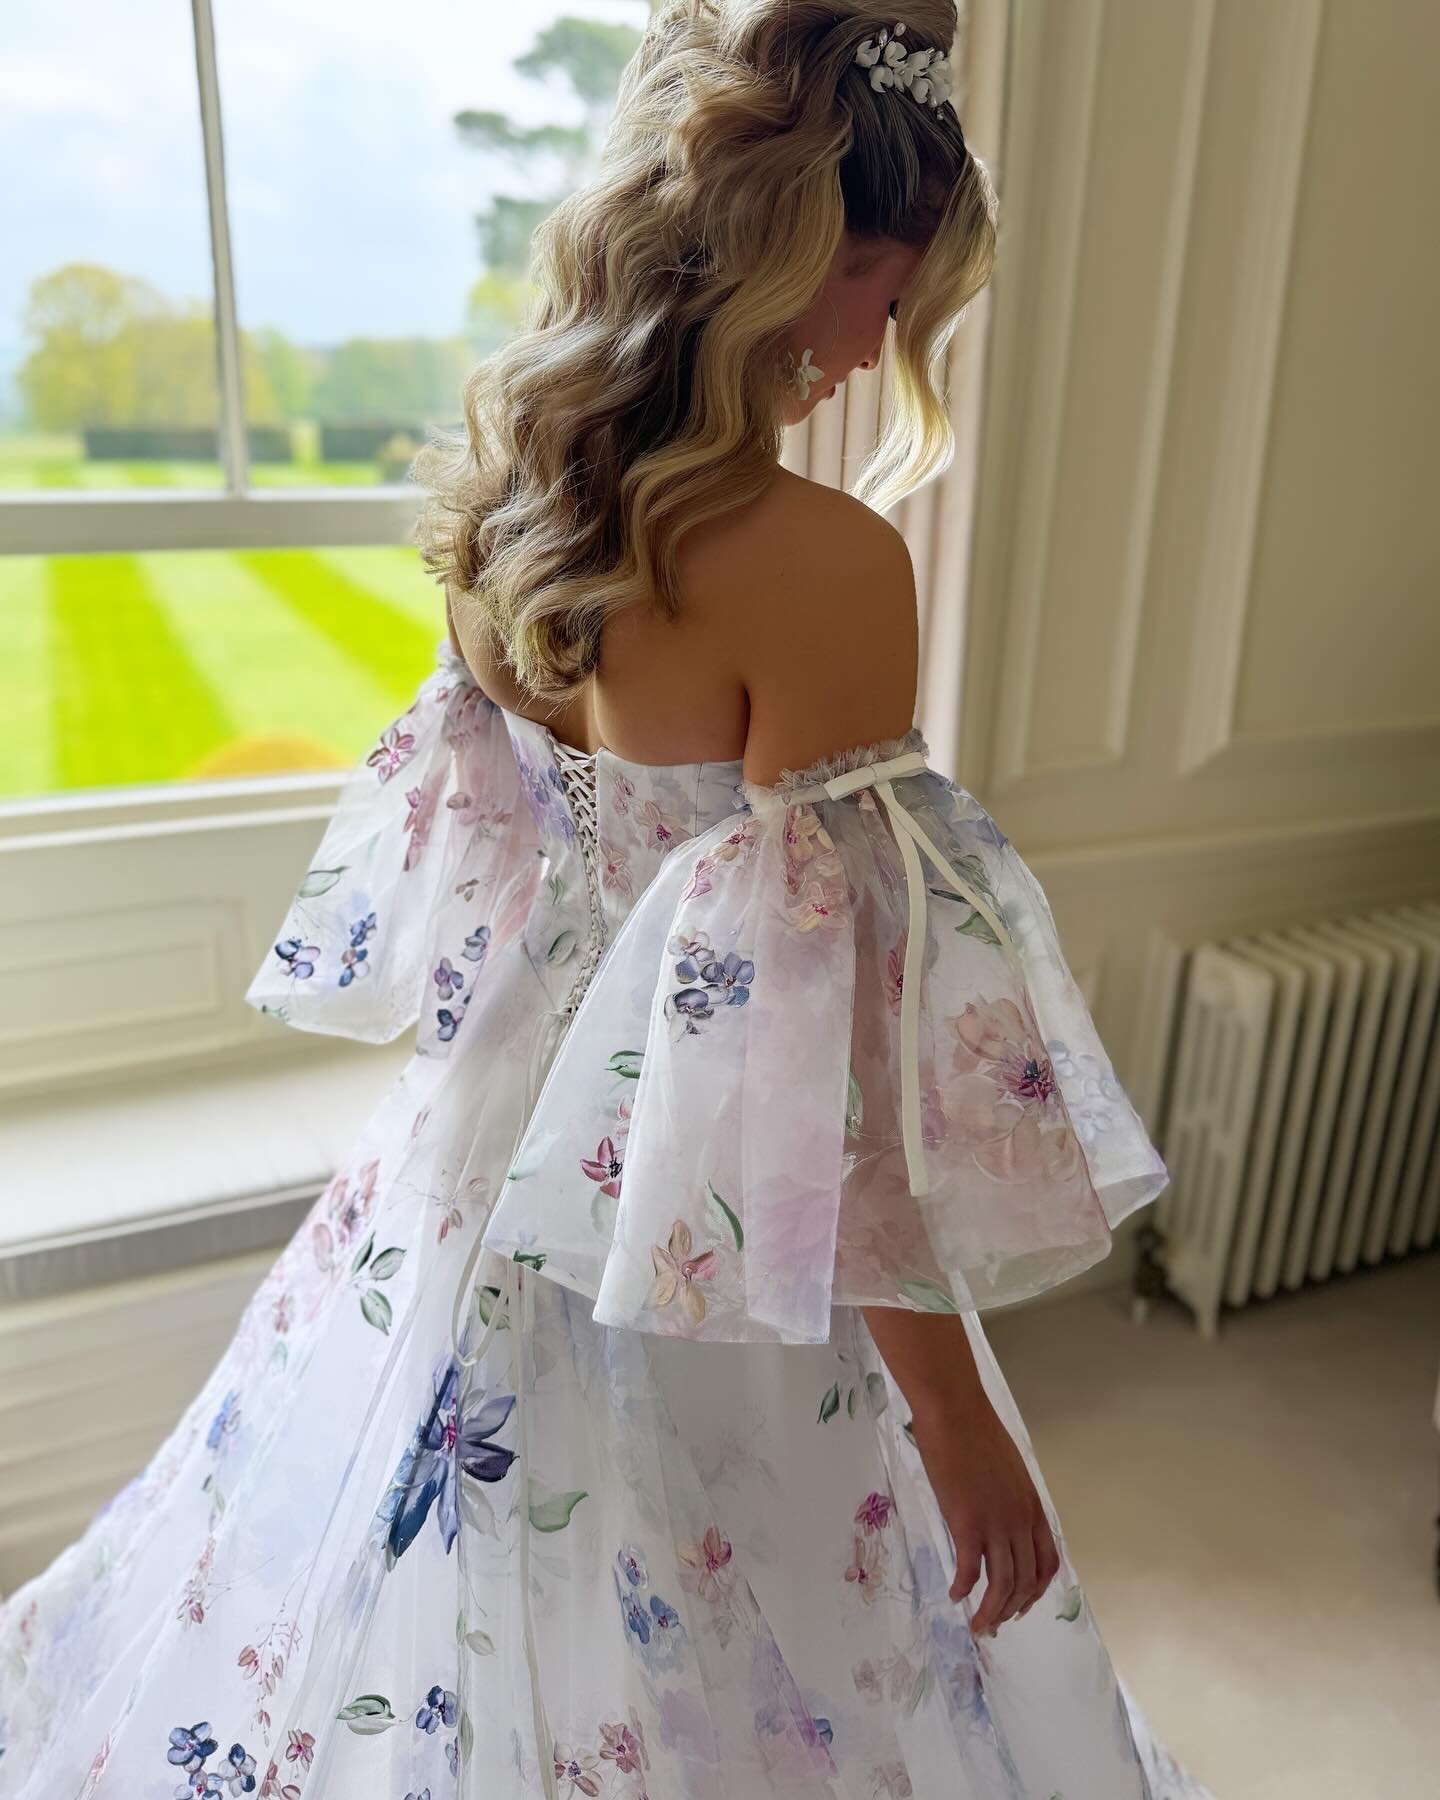 S H O O T  D A Y 📸 

We&rsquo;ve had the most fun! Today we were lucky enough to work alongside some of Buckinghamshire&rsquo;s most talented wedding suppliers shooting no other than the newest collection by @houseofsavin 🌸🦋

Here are a few sneaky